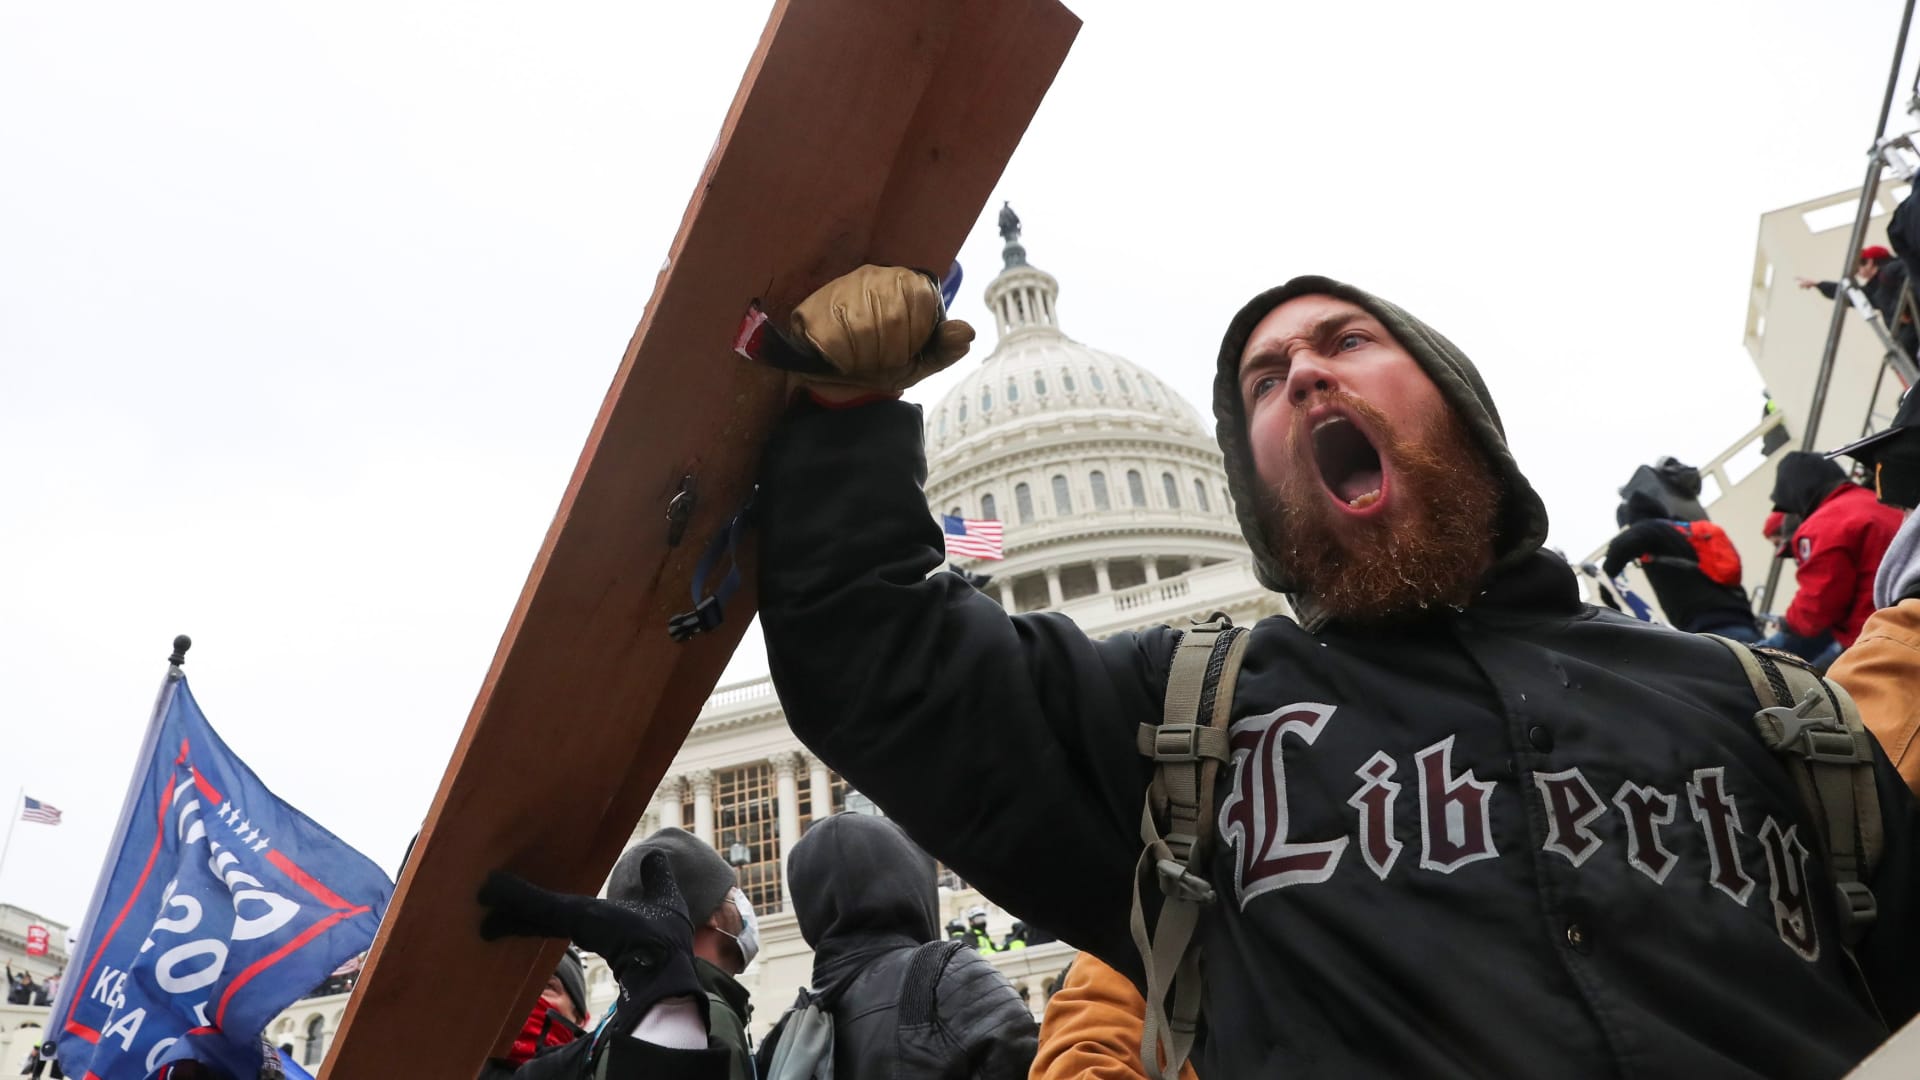 A man shouts as supporters of U.S. President Donald Trump gather in front of the U.S. Capitol Building in Washington, January 6, 2021.